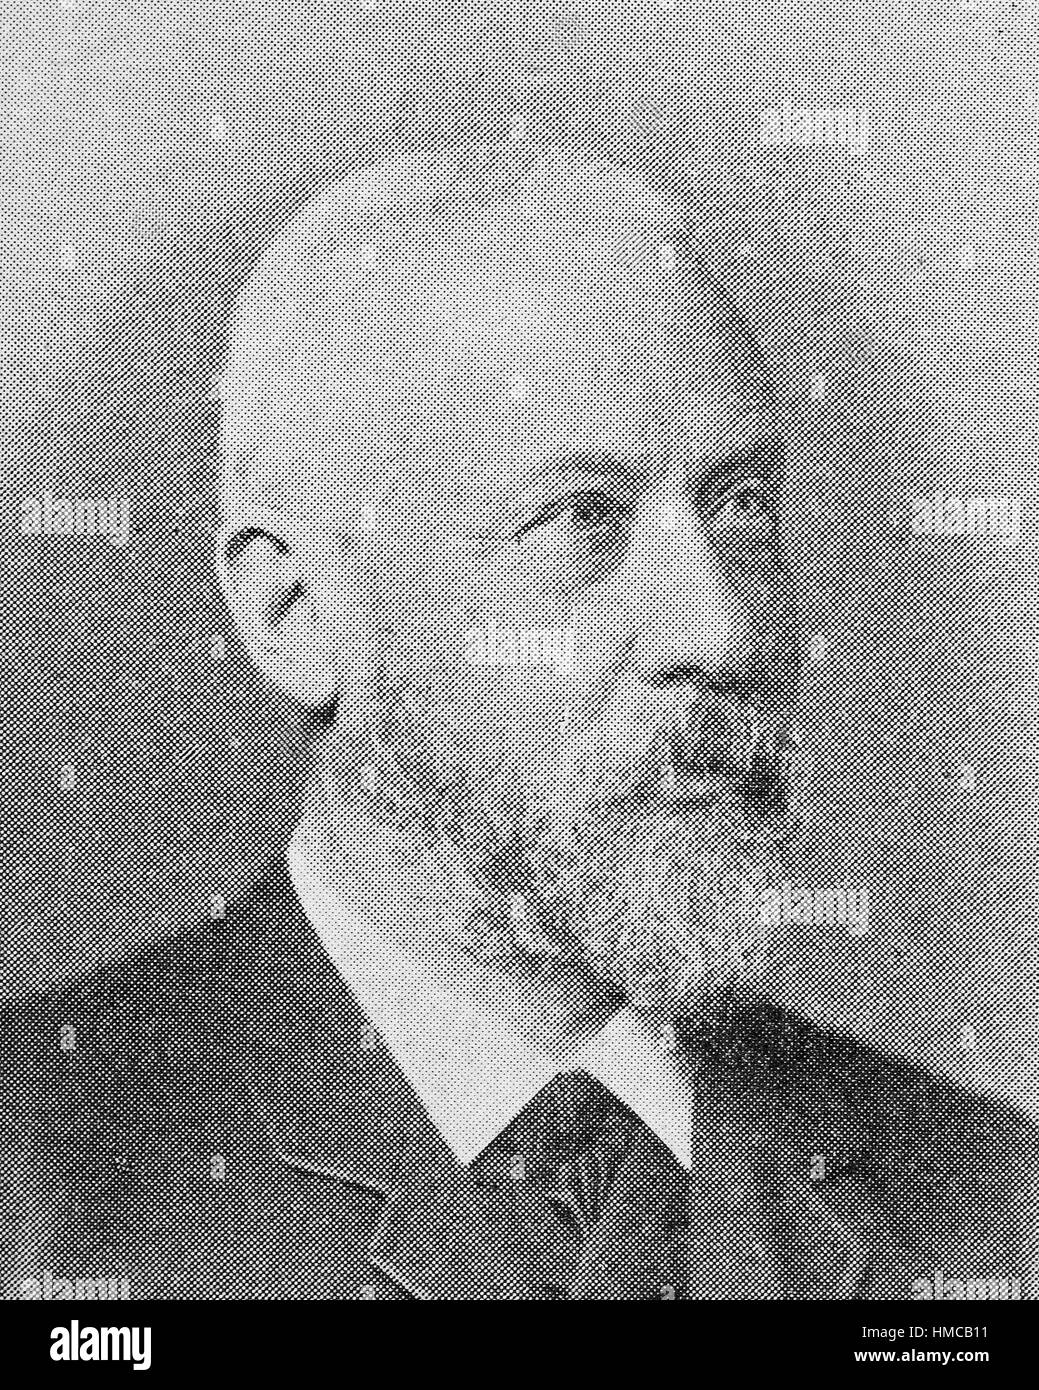 Wilhelm Dilthey, German, 19 November 1833 - 1 October 1911, was a German historian, psychologist, sociologist, and hermeneutic philosopher, photo or illustration, published 1892, digital improved Stock Photo